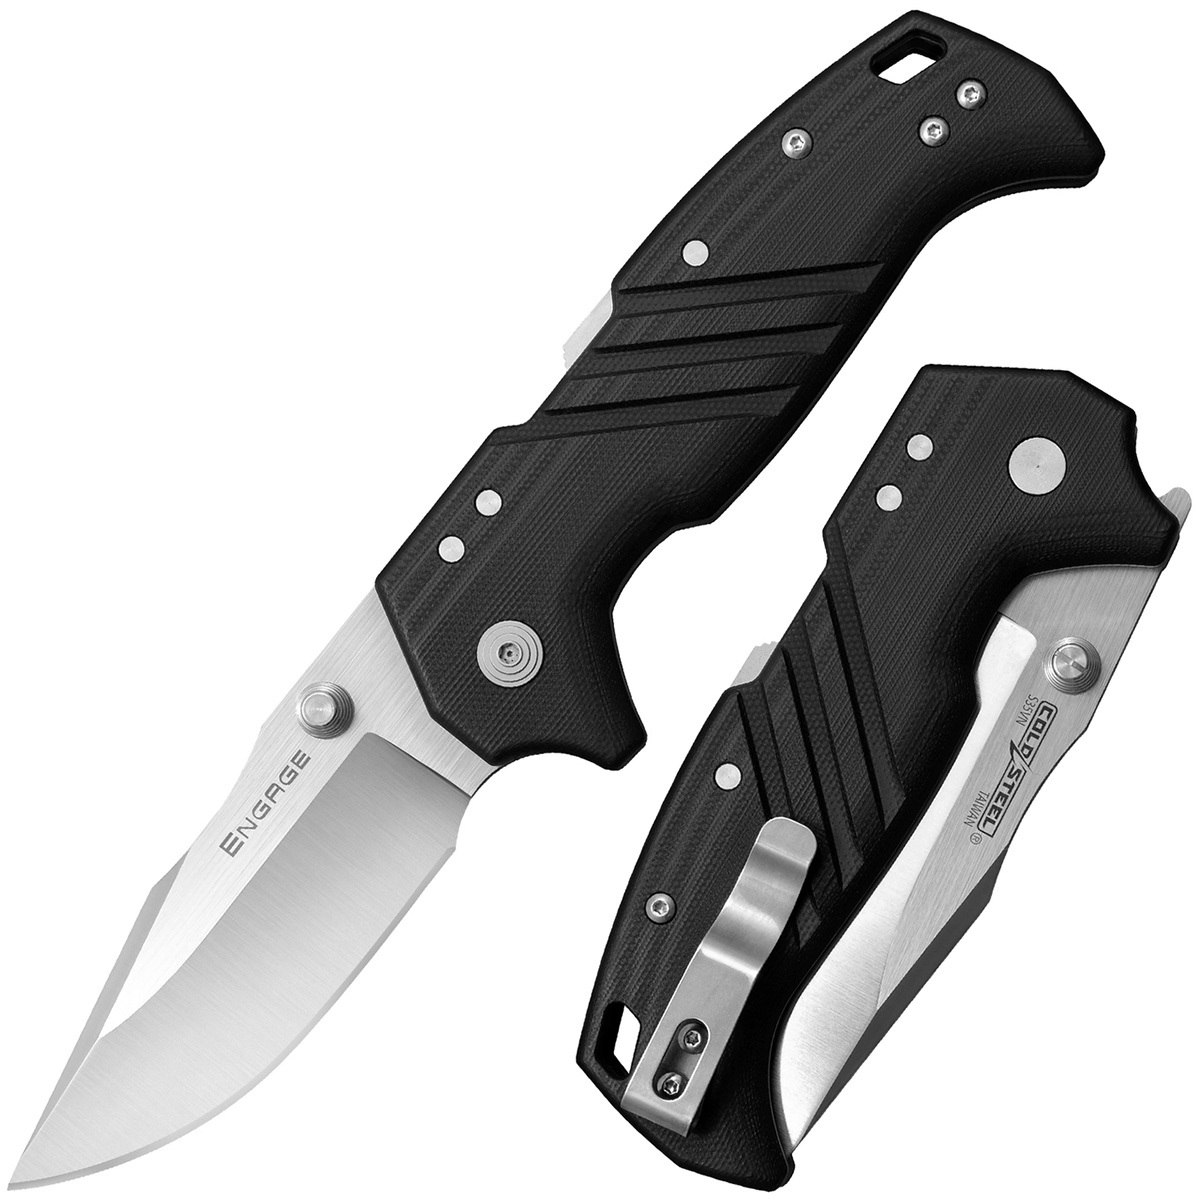   Cold Steel Engage,  S35VN,  G10, black